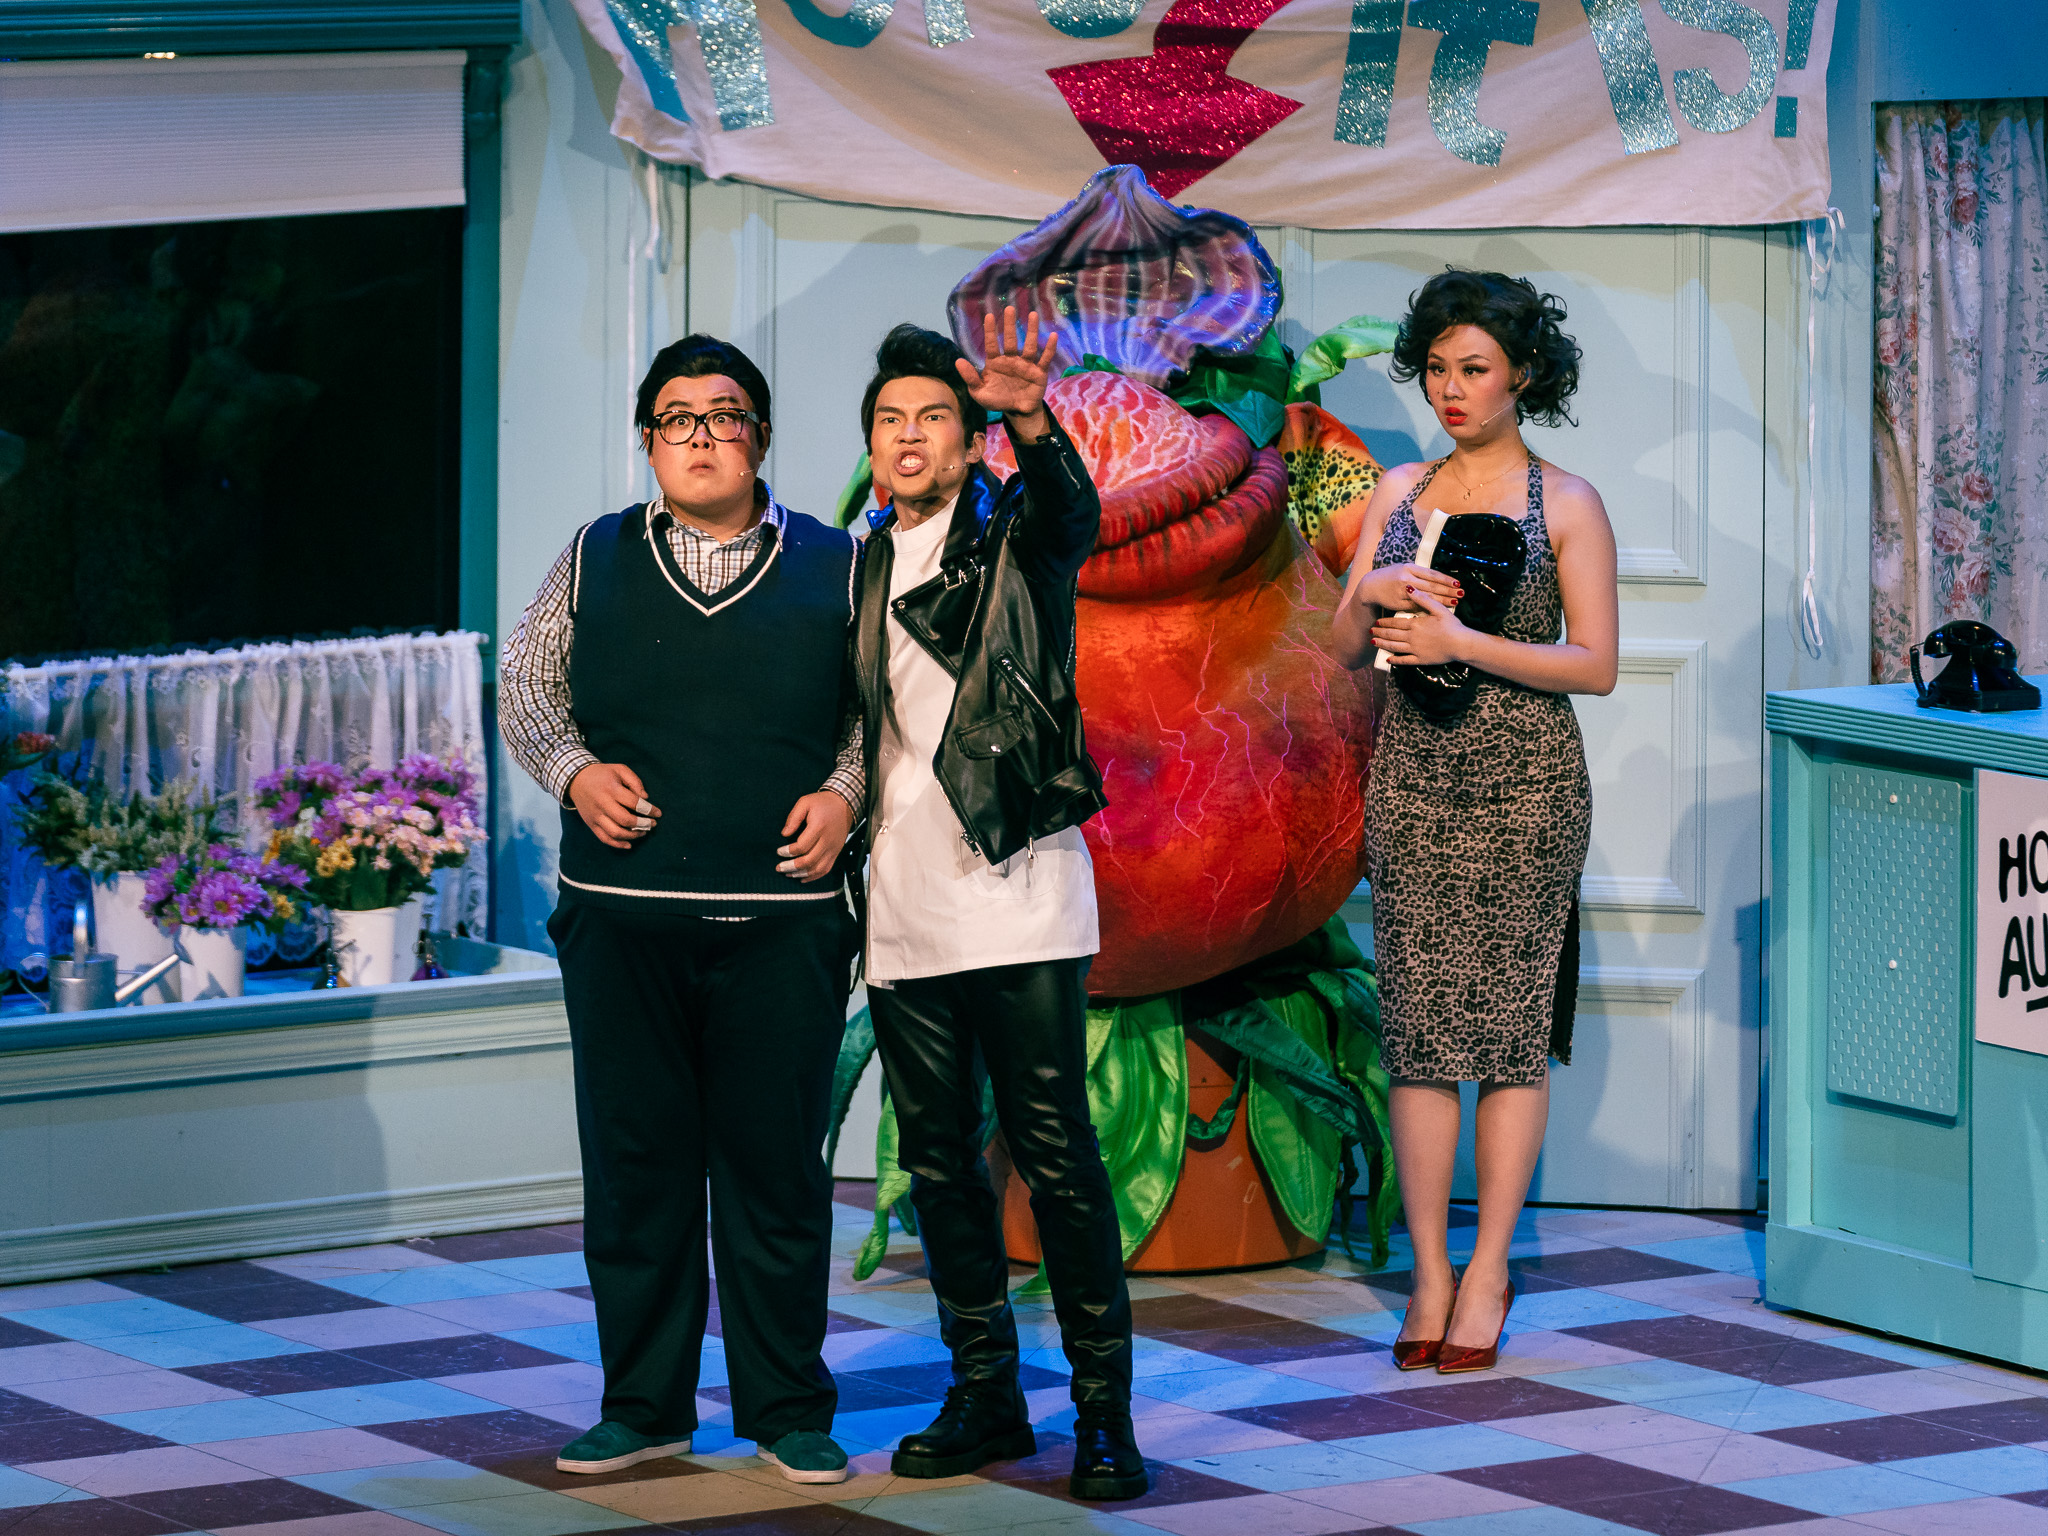 Wide shot of some of The Little Shop of Horrors cast